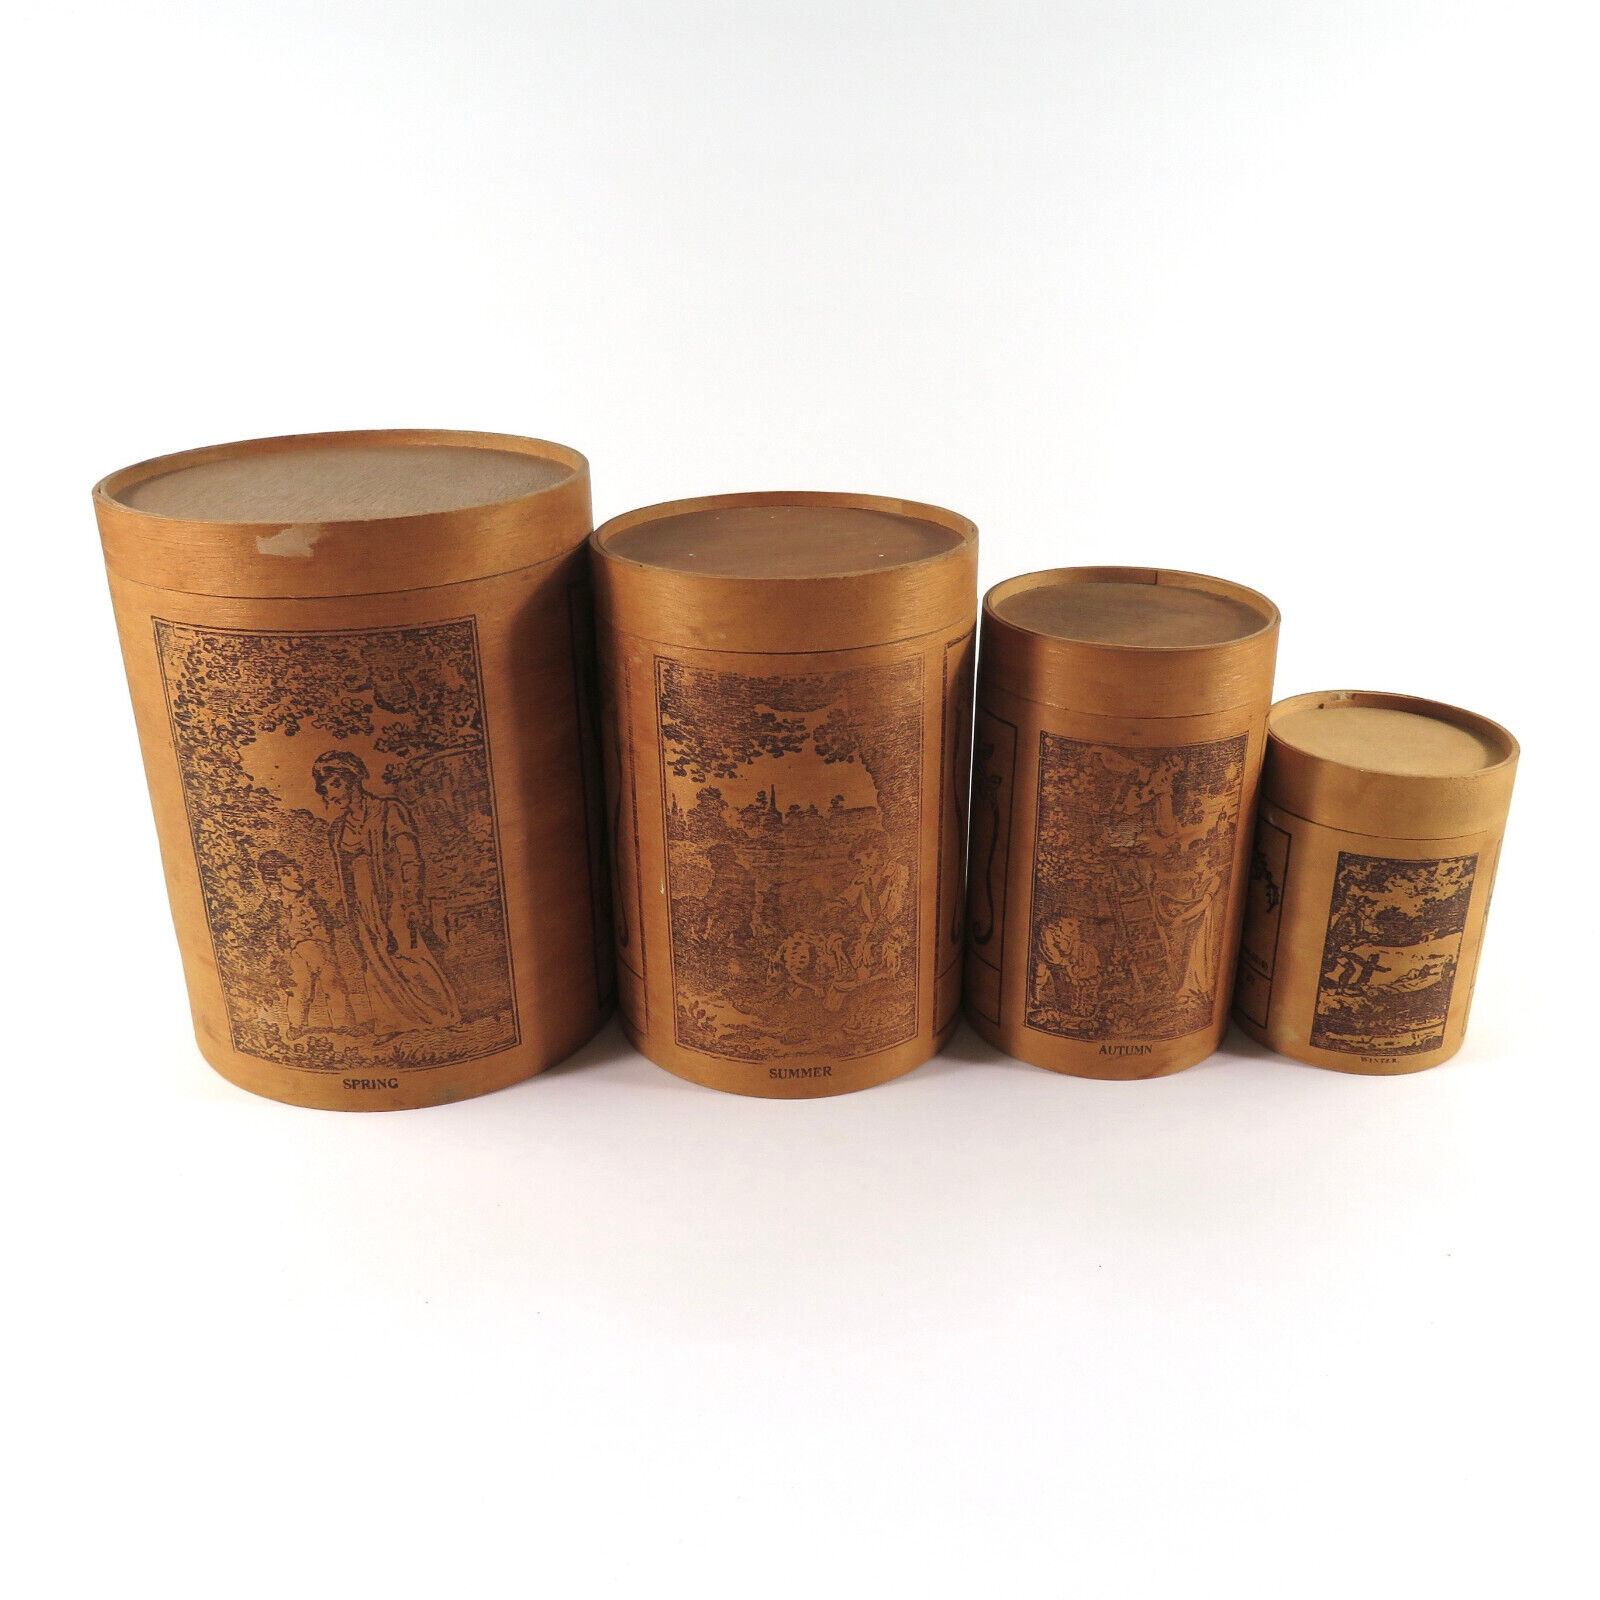 Laurie & Whittle Four Seasons Woodcuts Nesting Canisters Vintage Set of 4